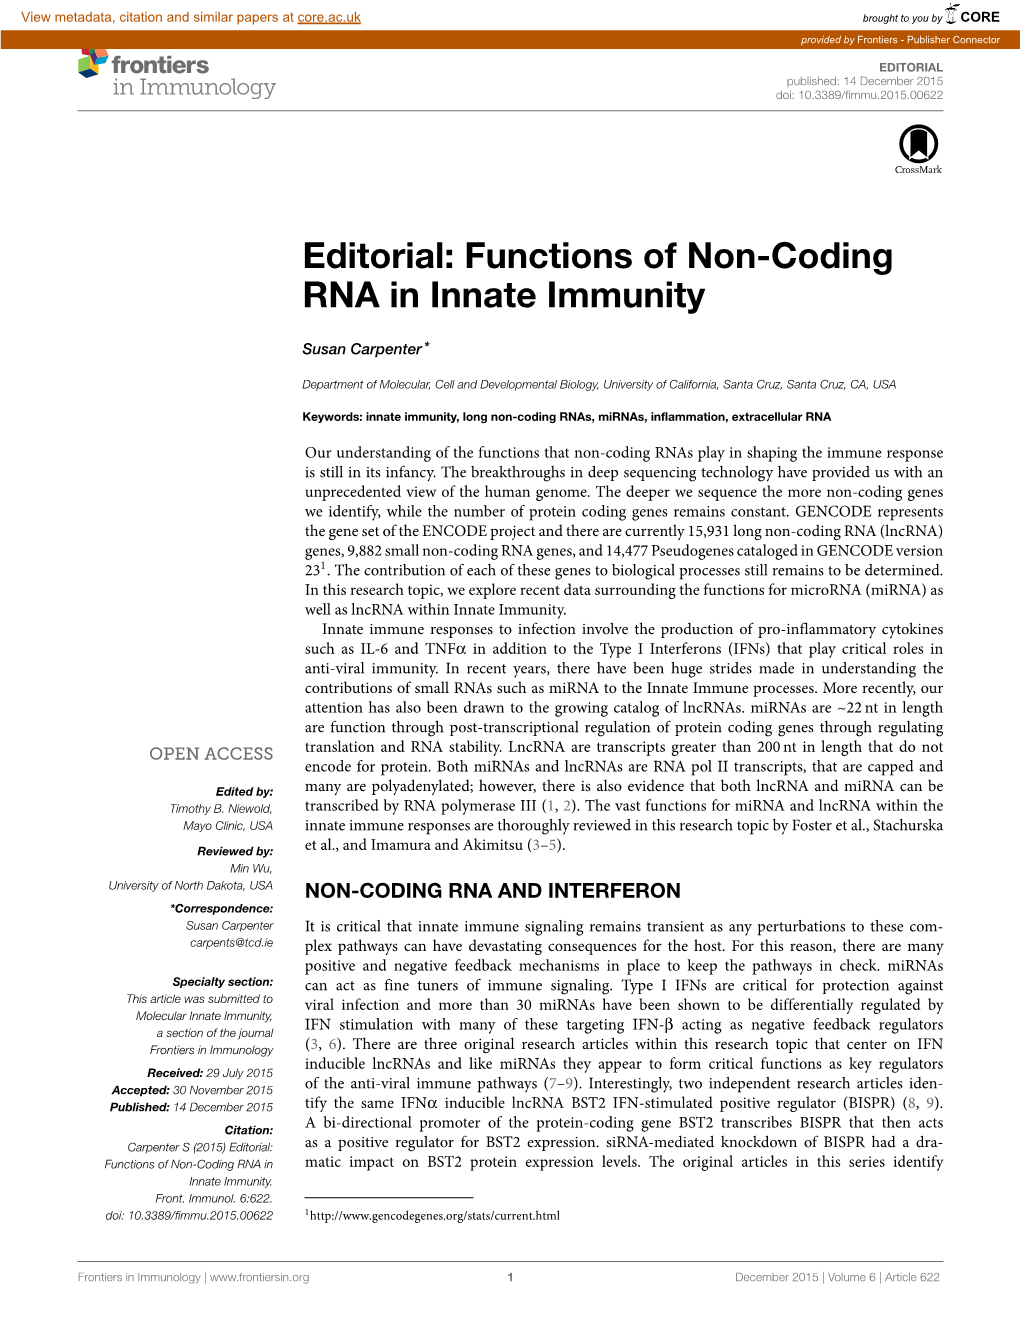 Editorial: Functions of Non-Coding RNA in Innate Immunity